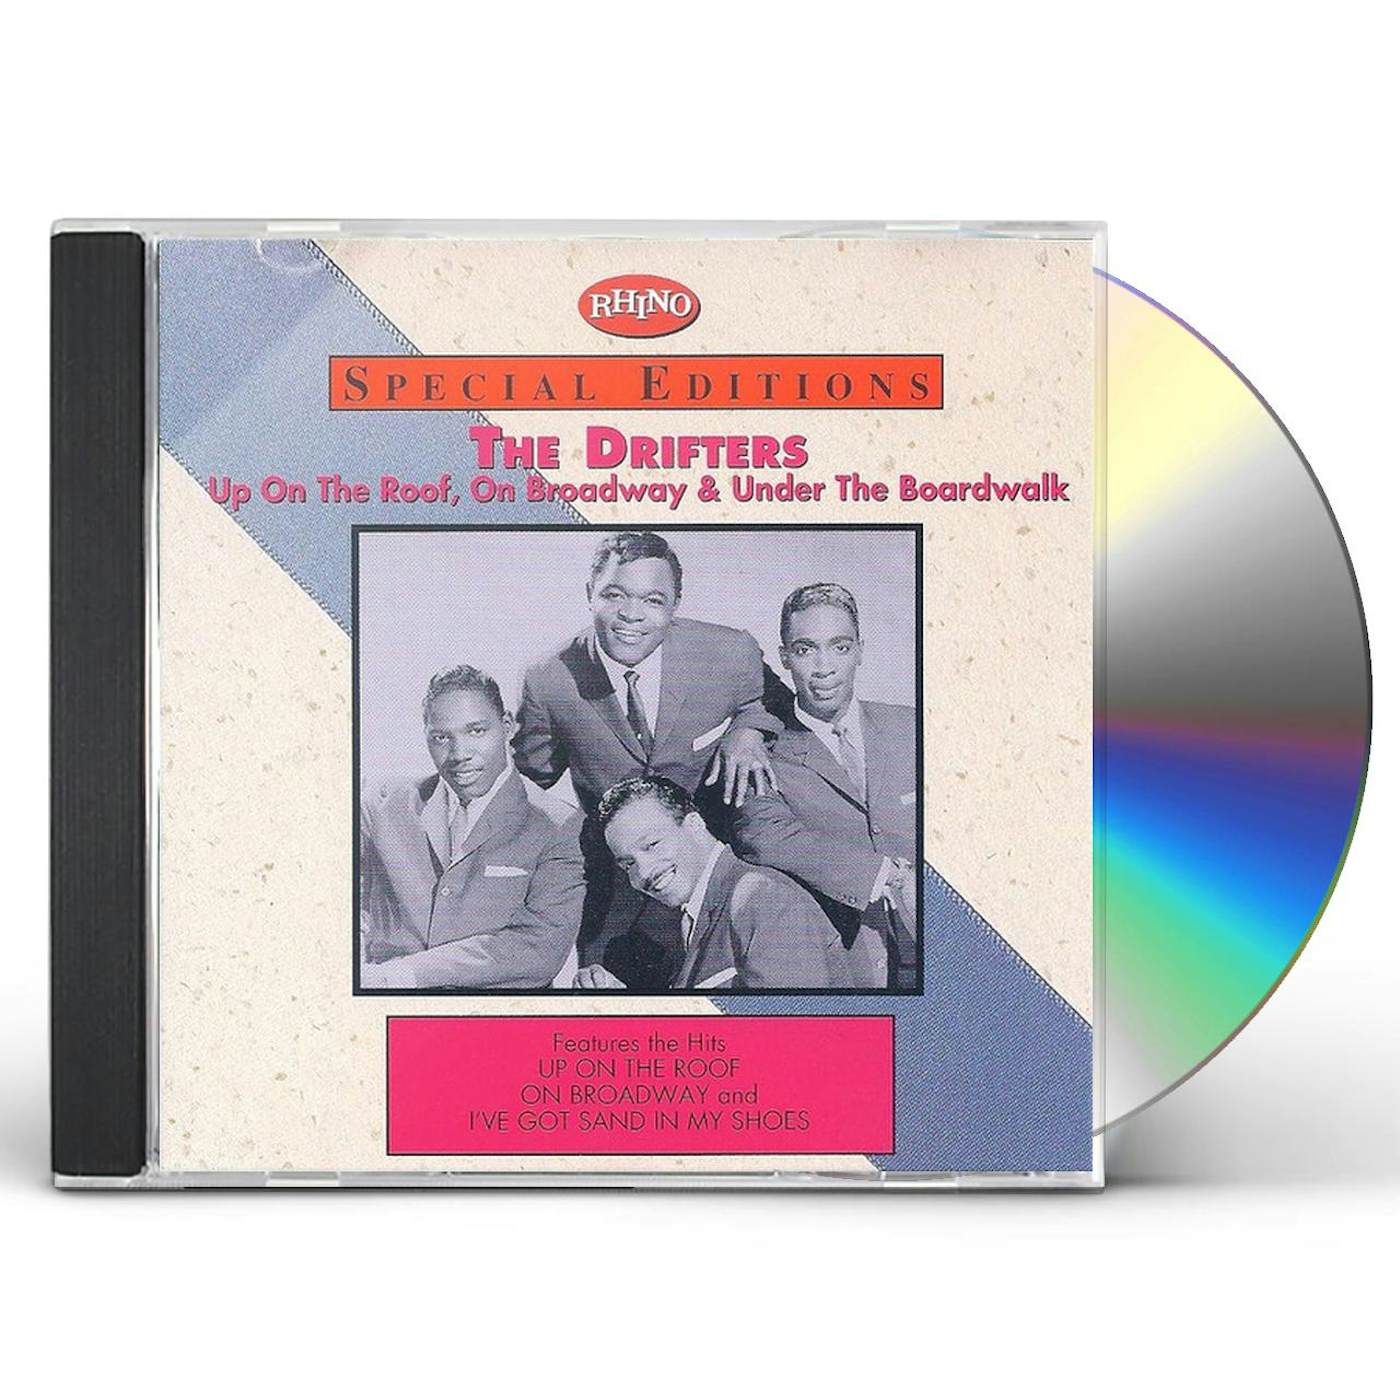 The Drifters HITS (UP ON THE ROOF, ON BROADWAY, UNDER THE BOARDWALK) CD